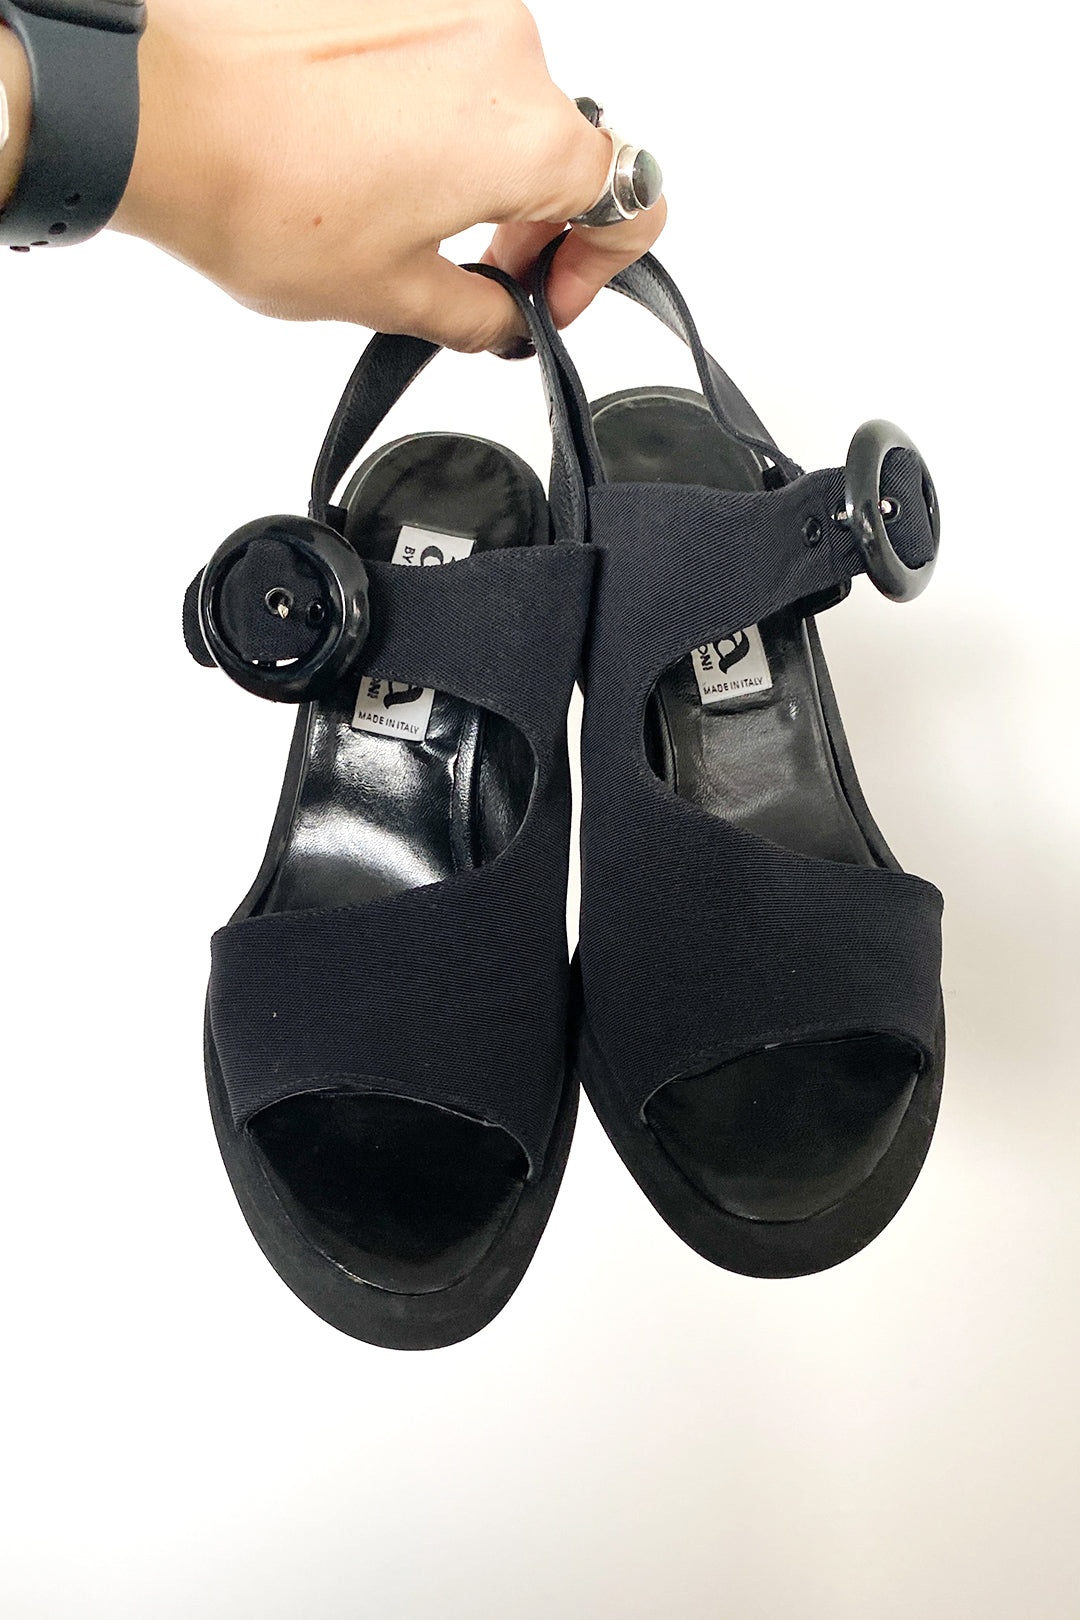 90s sandals Italy 40.5